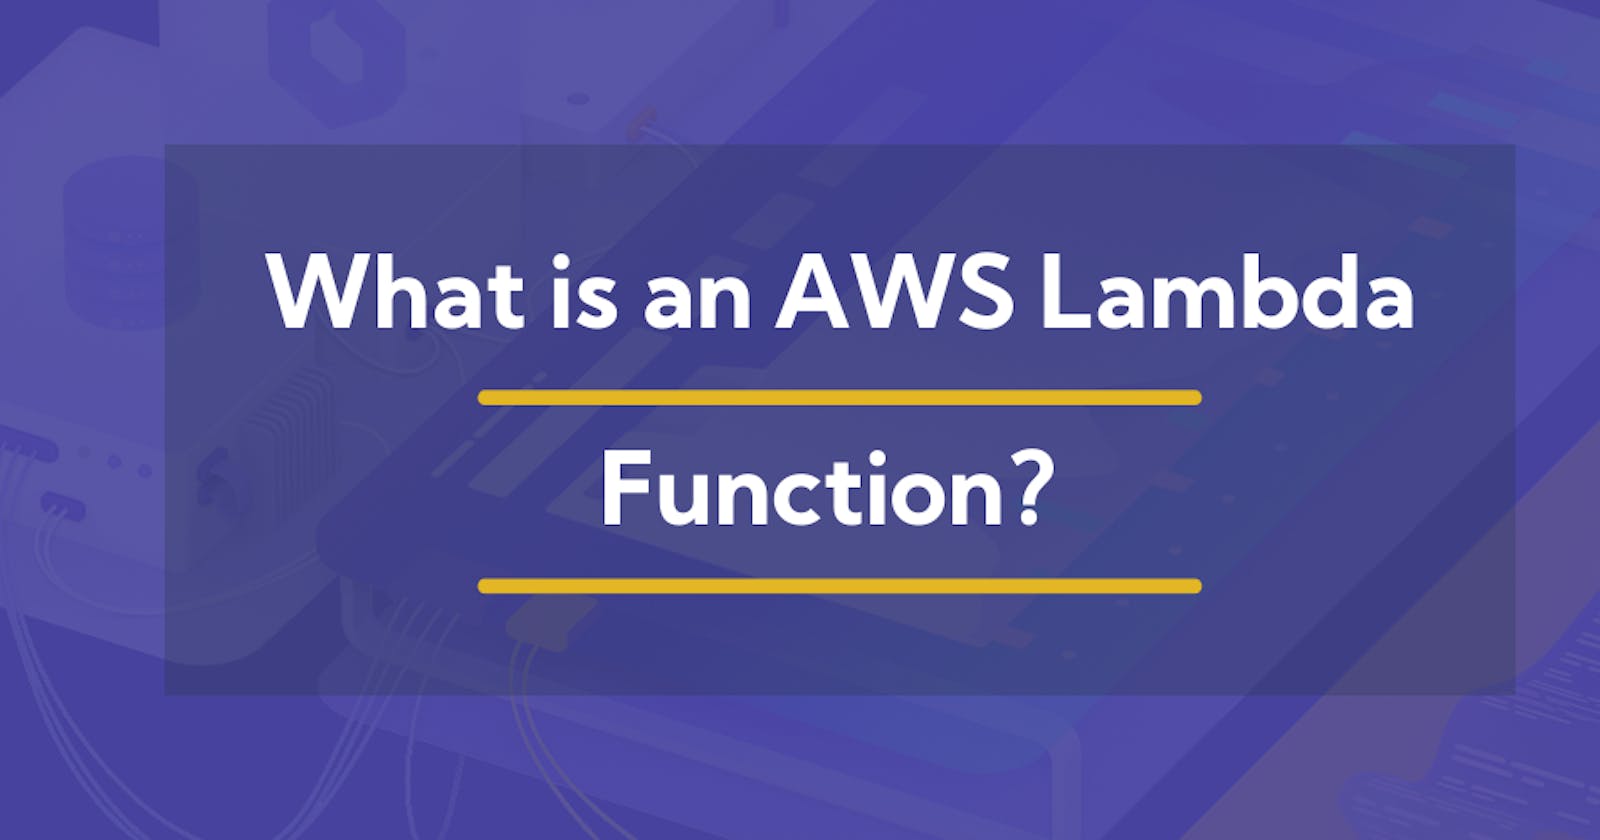 What is an AWS Lambda function?